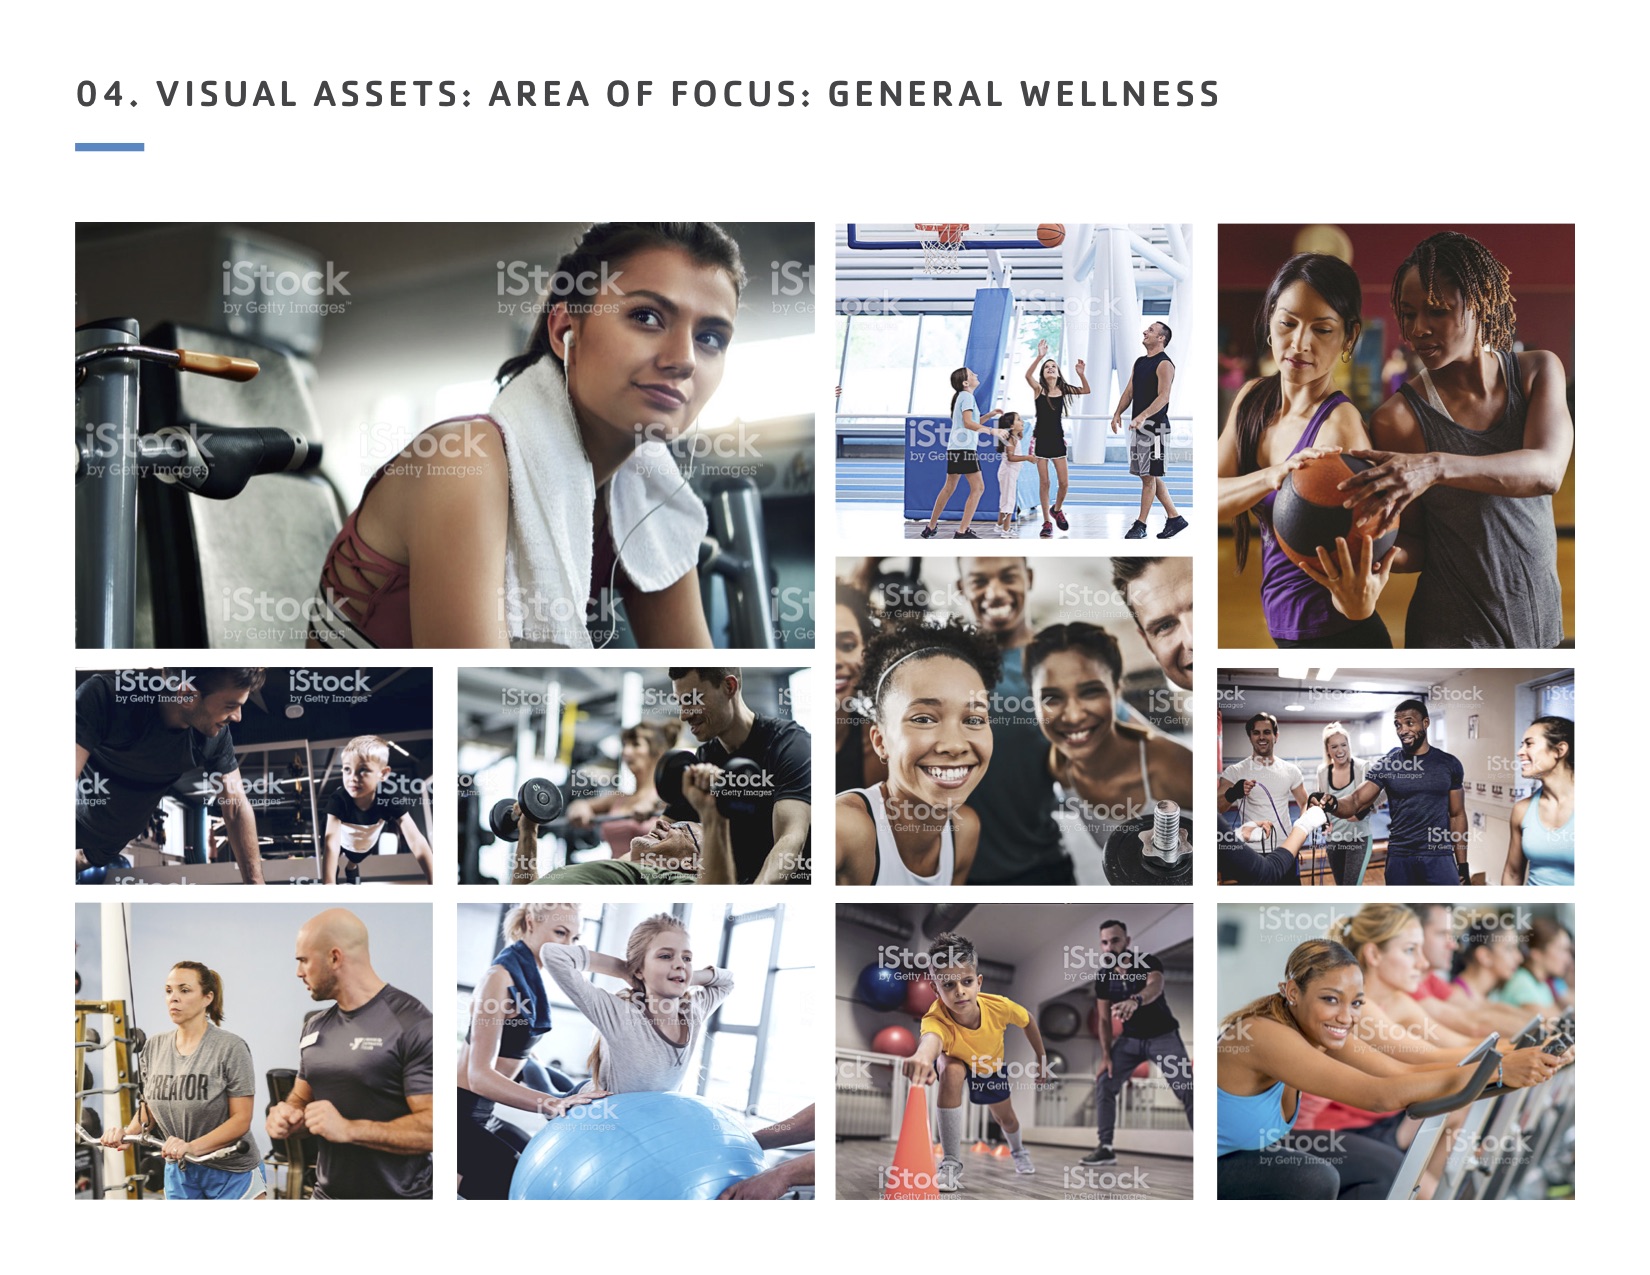 YMCA of South Florida Marketing Winter Campaign Visual Assets Area of Focus General Wellness